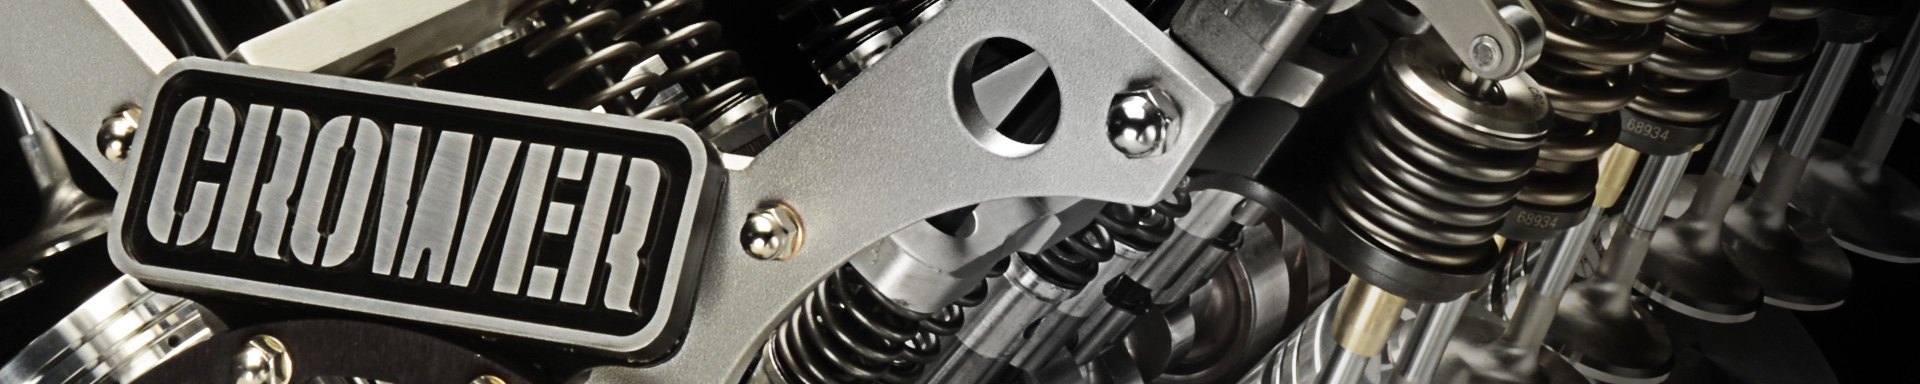 Crower Racing Engines & Components